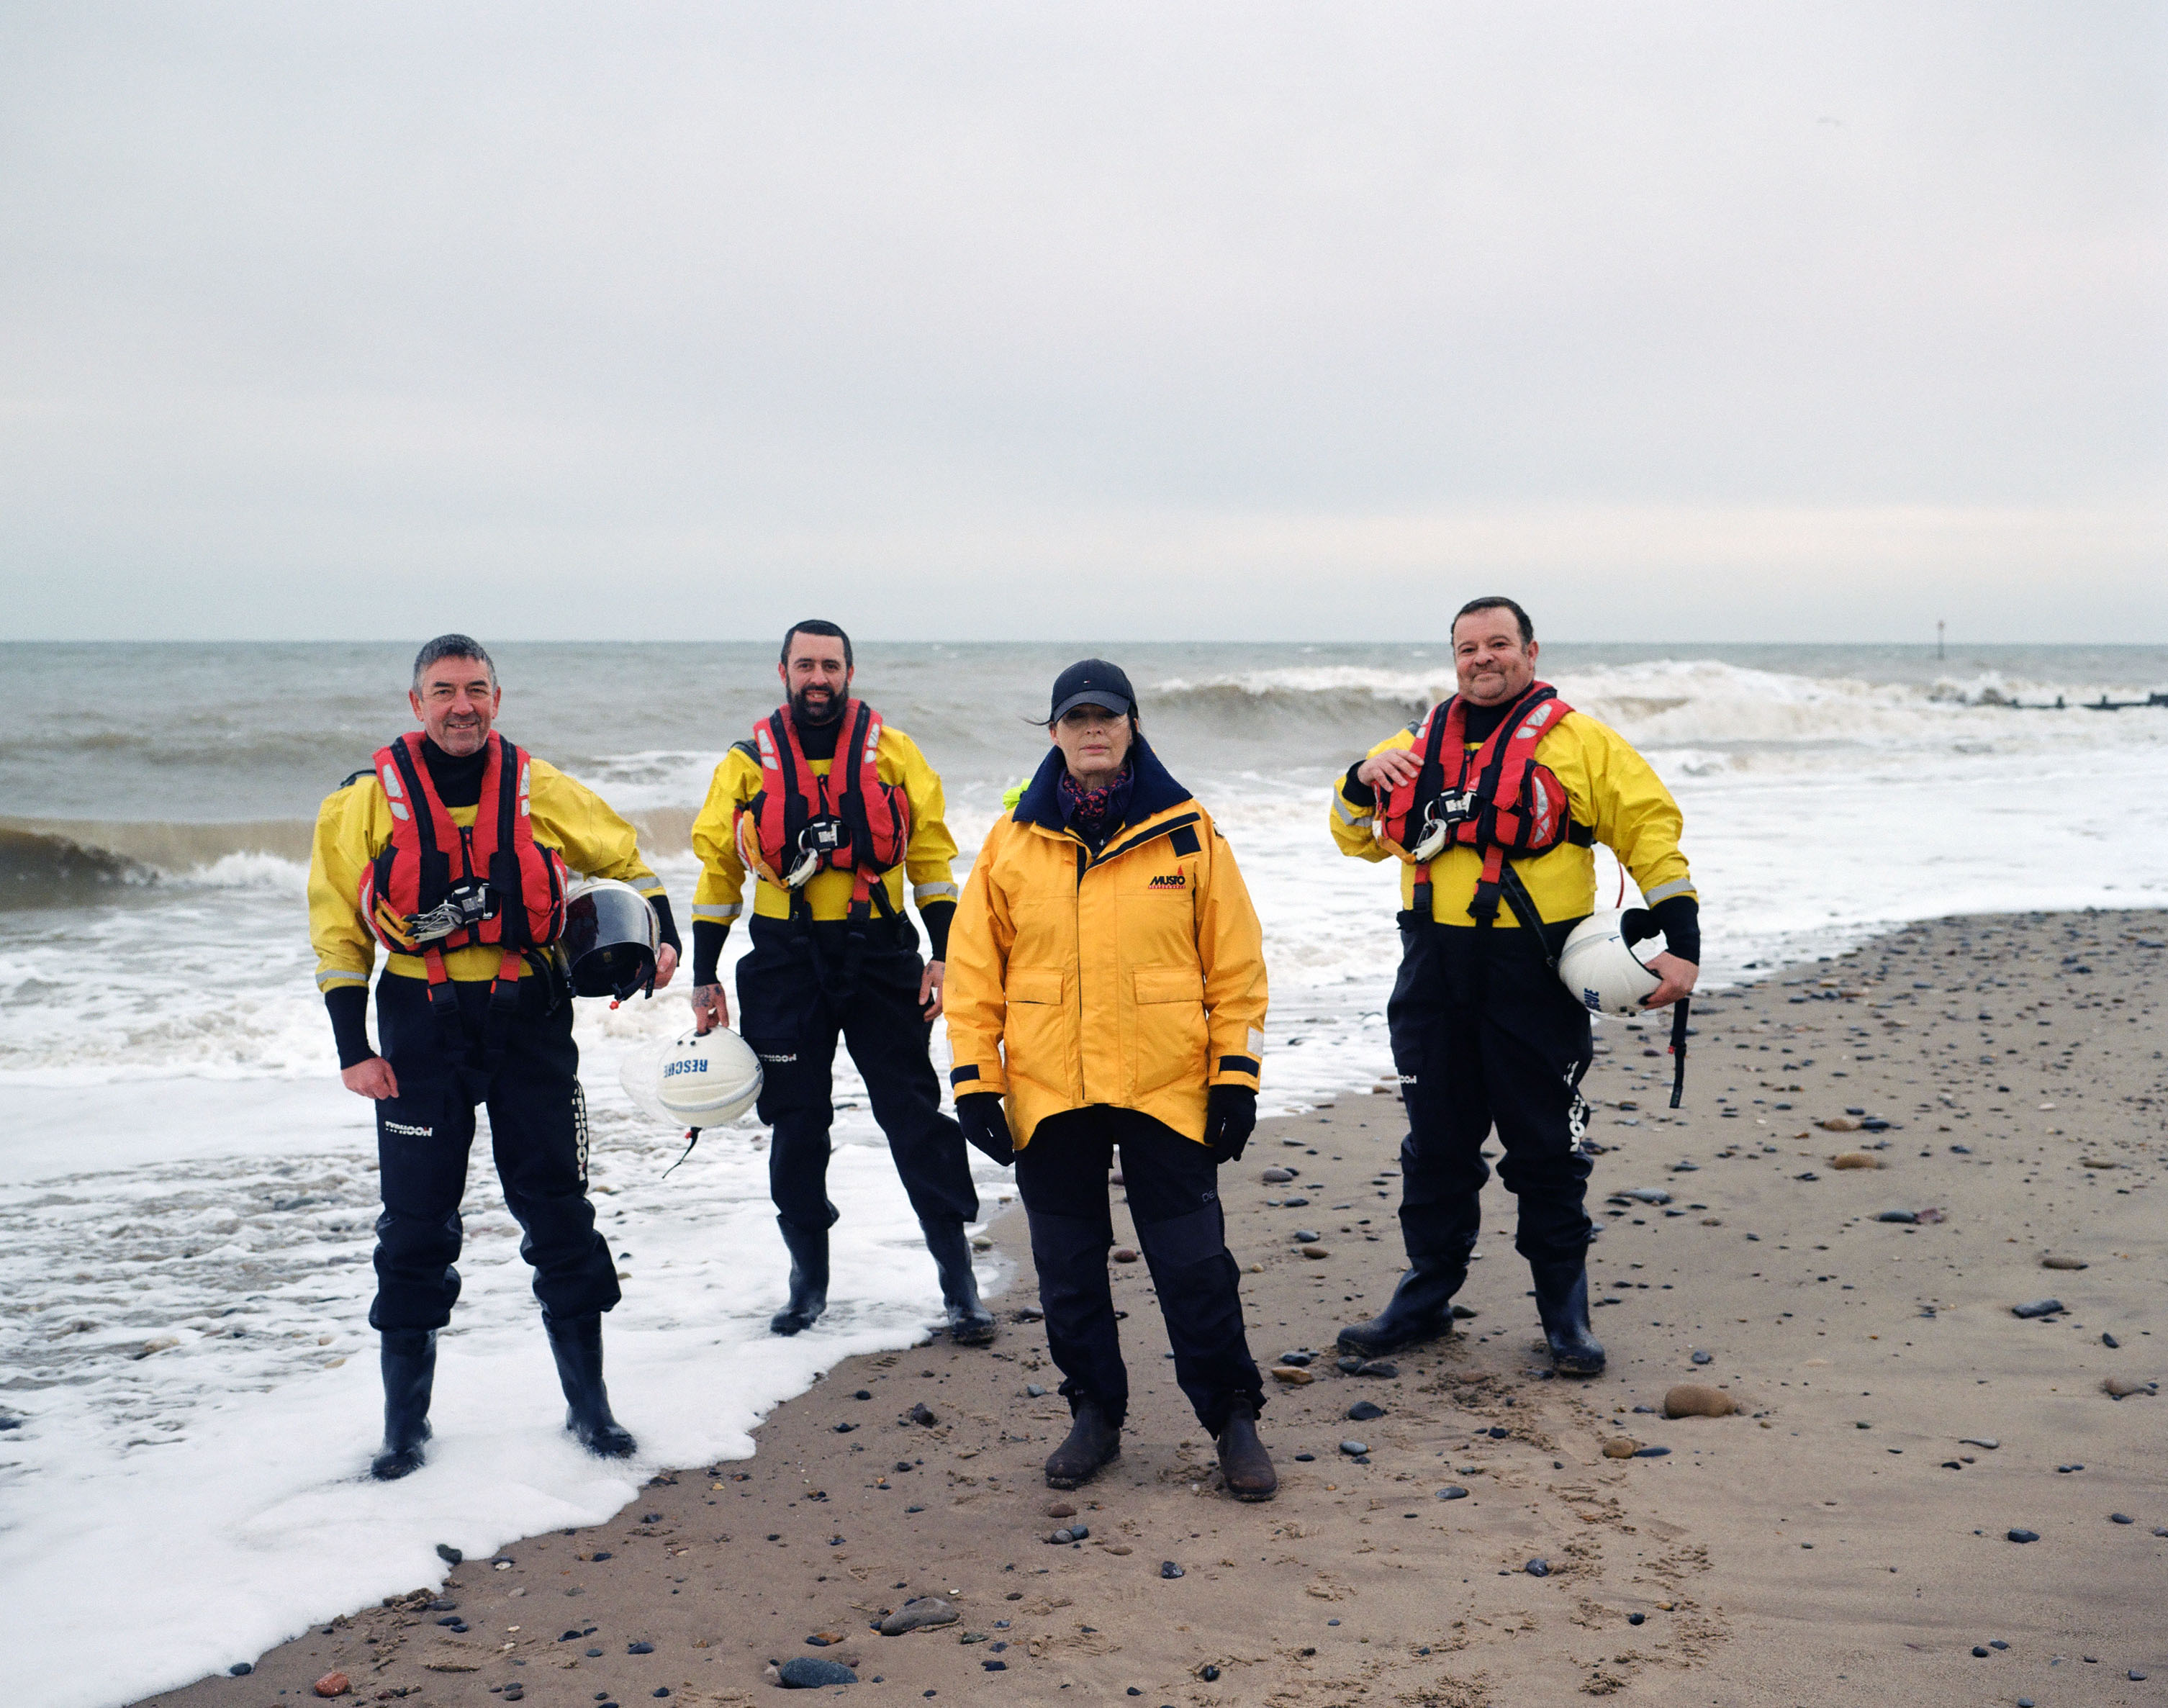 Group of coastal rescue workers